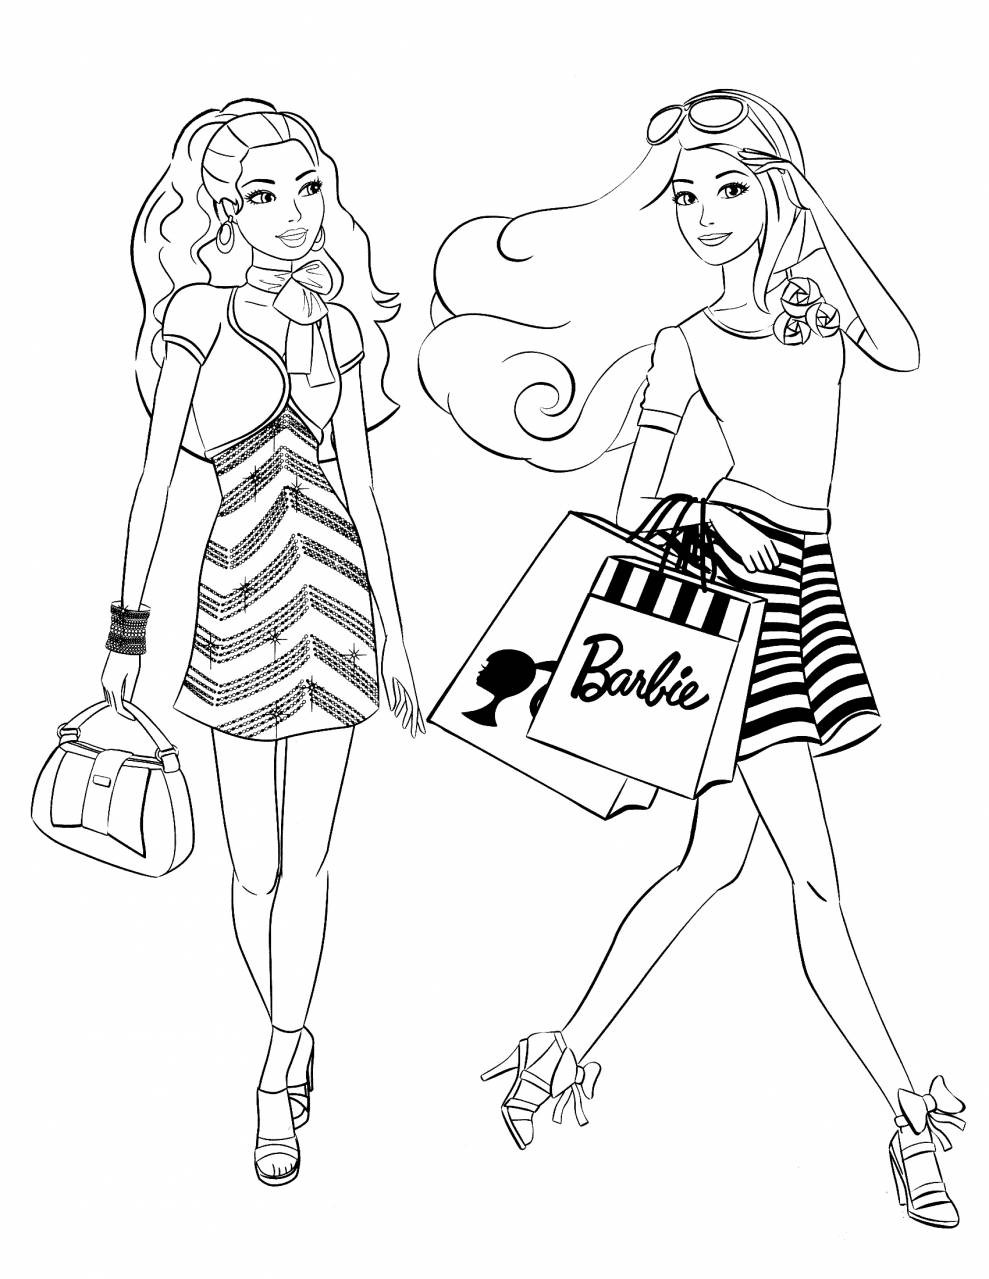 Coloring Sheets For Girls To Print Out
 Coloring Pages For Girls To Print Out Barbie Coloring